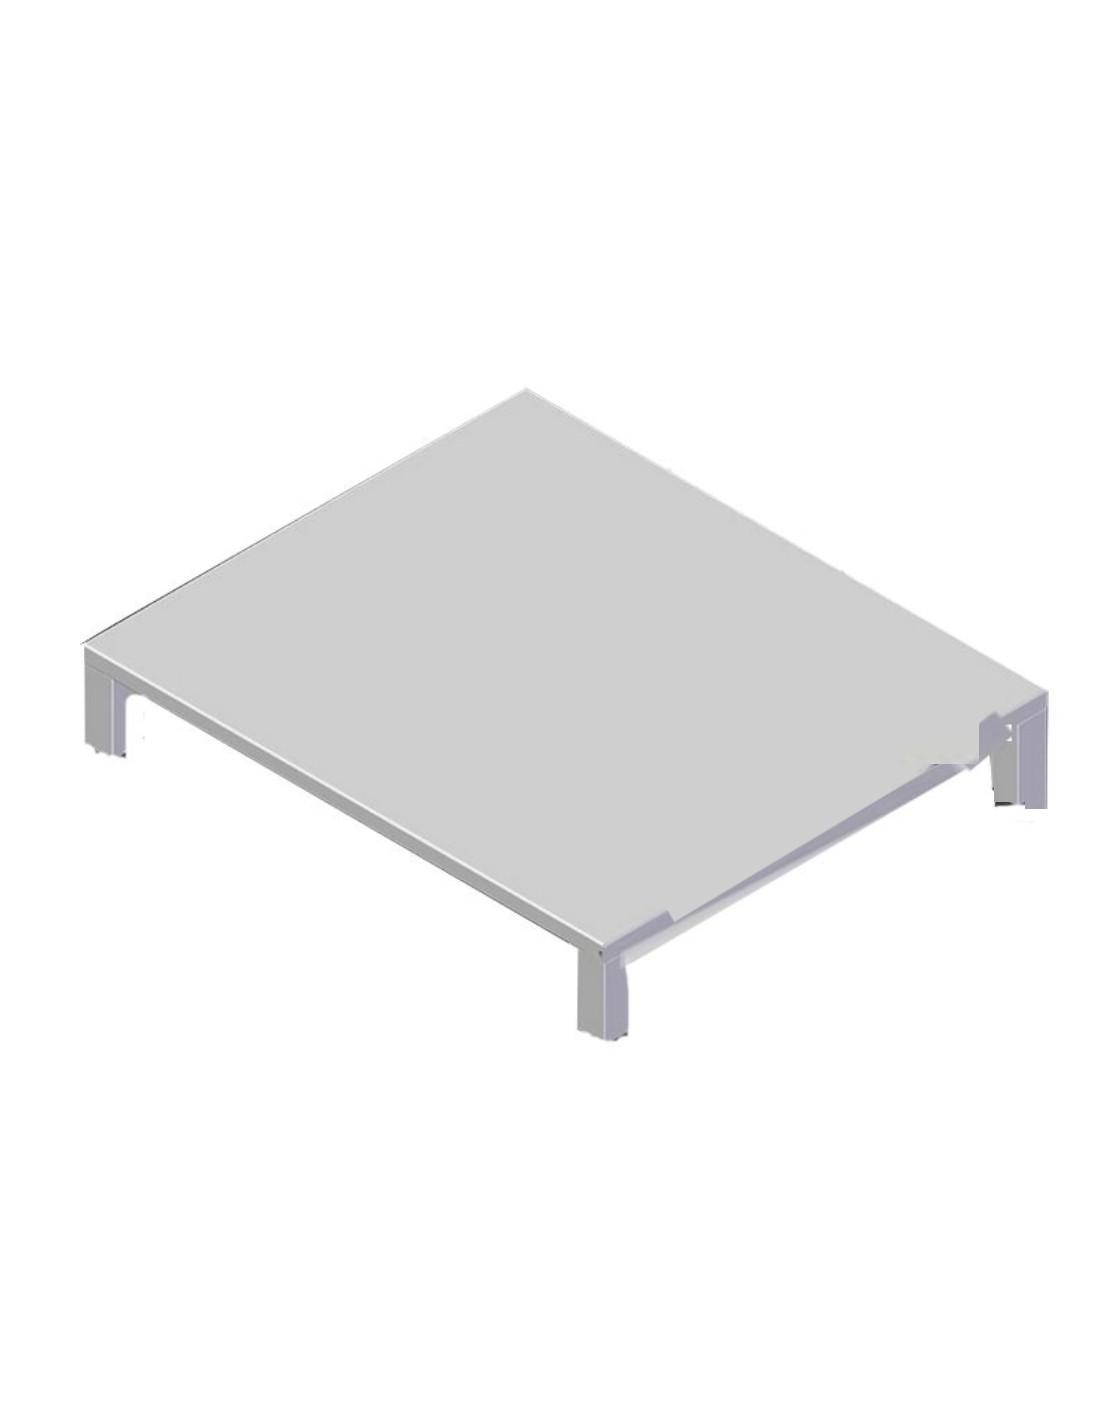 Fixed table in AISI 430 for 2 ovens - cm 61 x 63 x 54.1 h - For EKF 423, EKF 443 and EKF 523 (in all versions